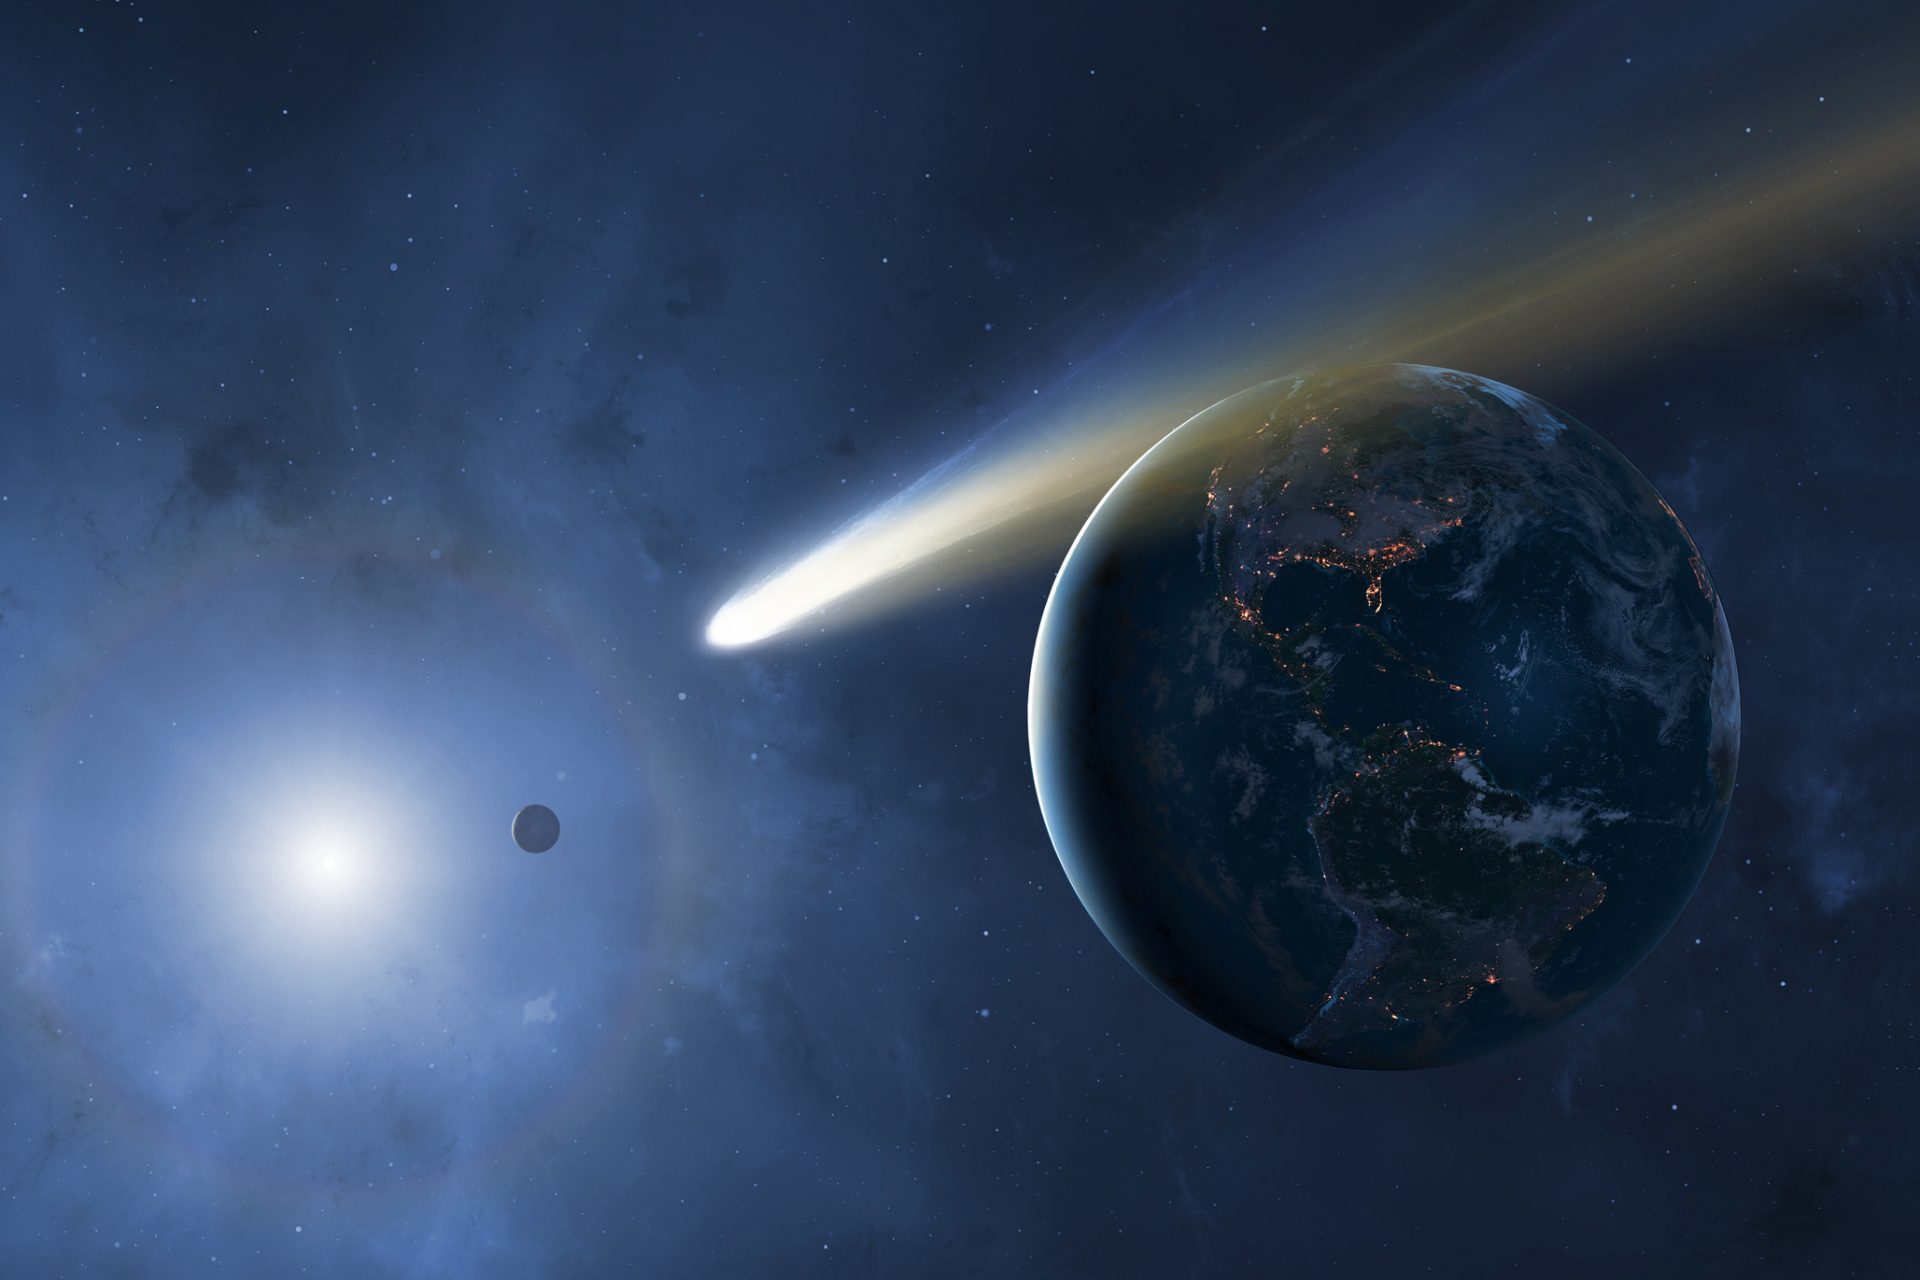 Astronomers found an explanation for what some thought was an alien spacecraft